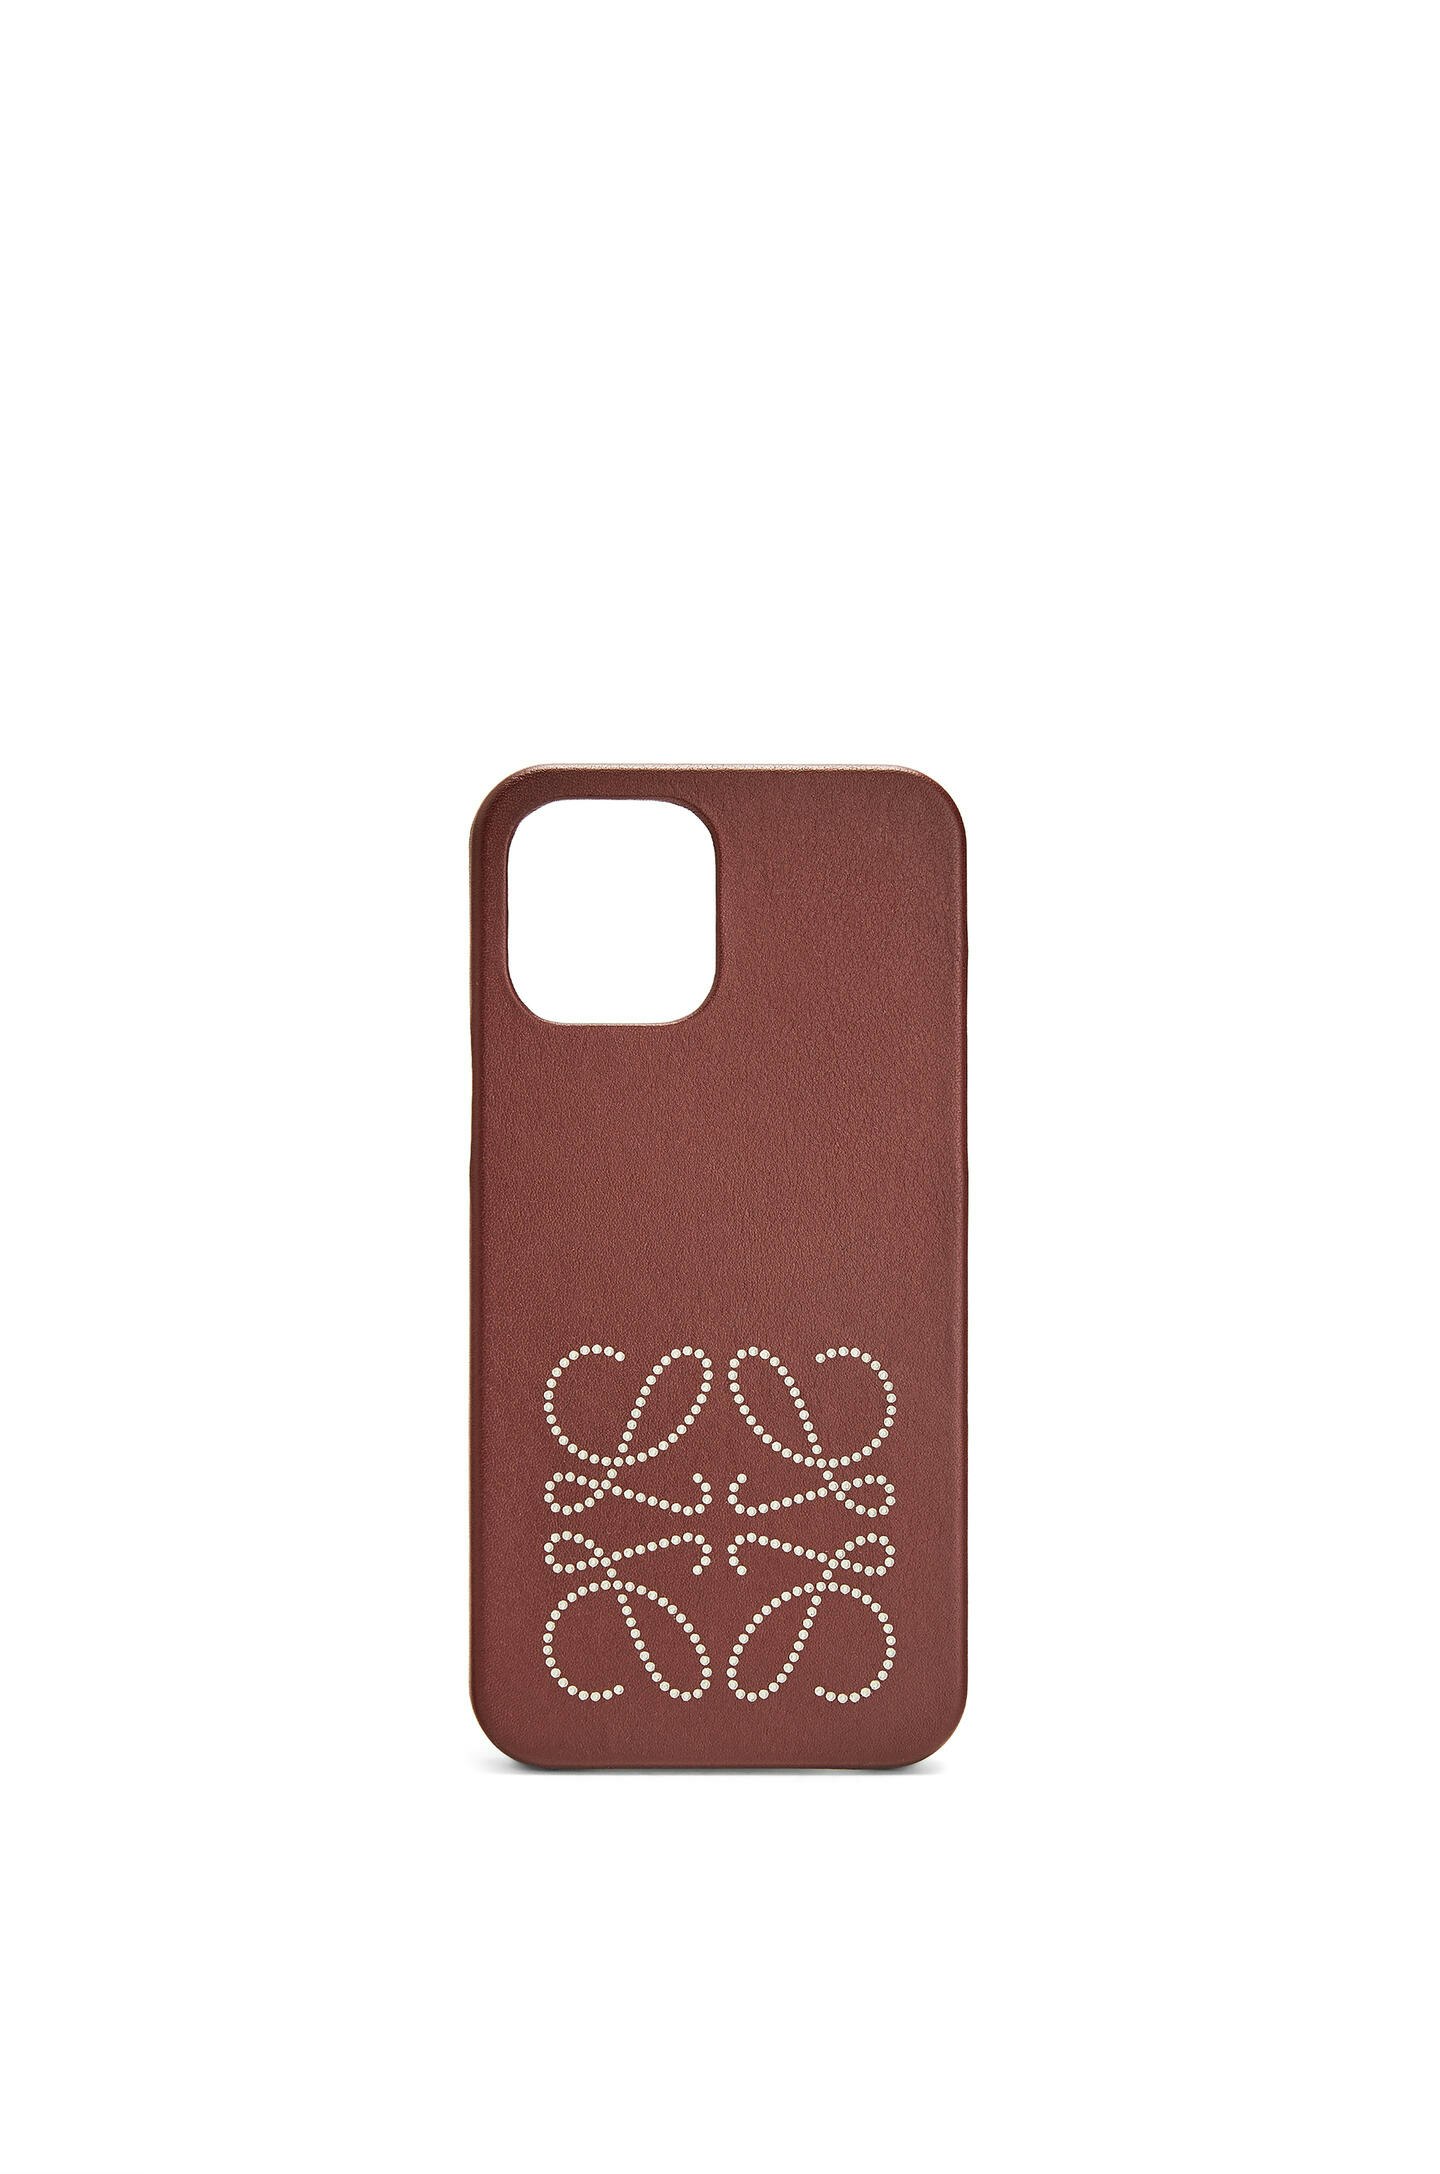 Loewe, Brand phone cover in calfskin for iPhone 12 Pro Max, £275